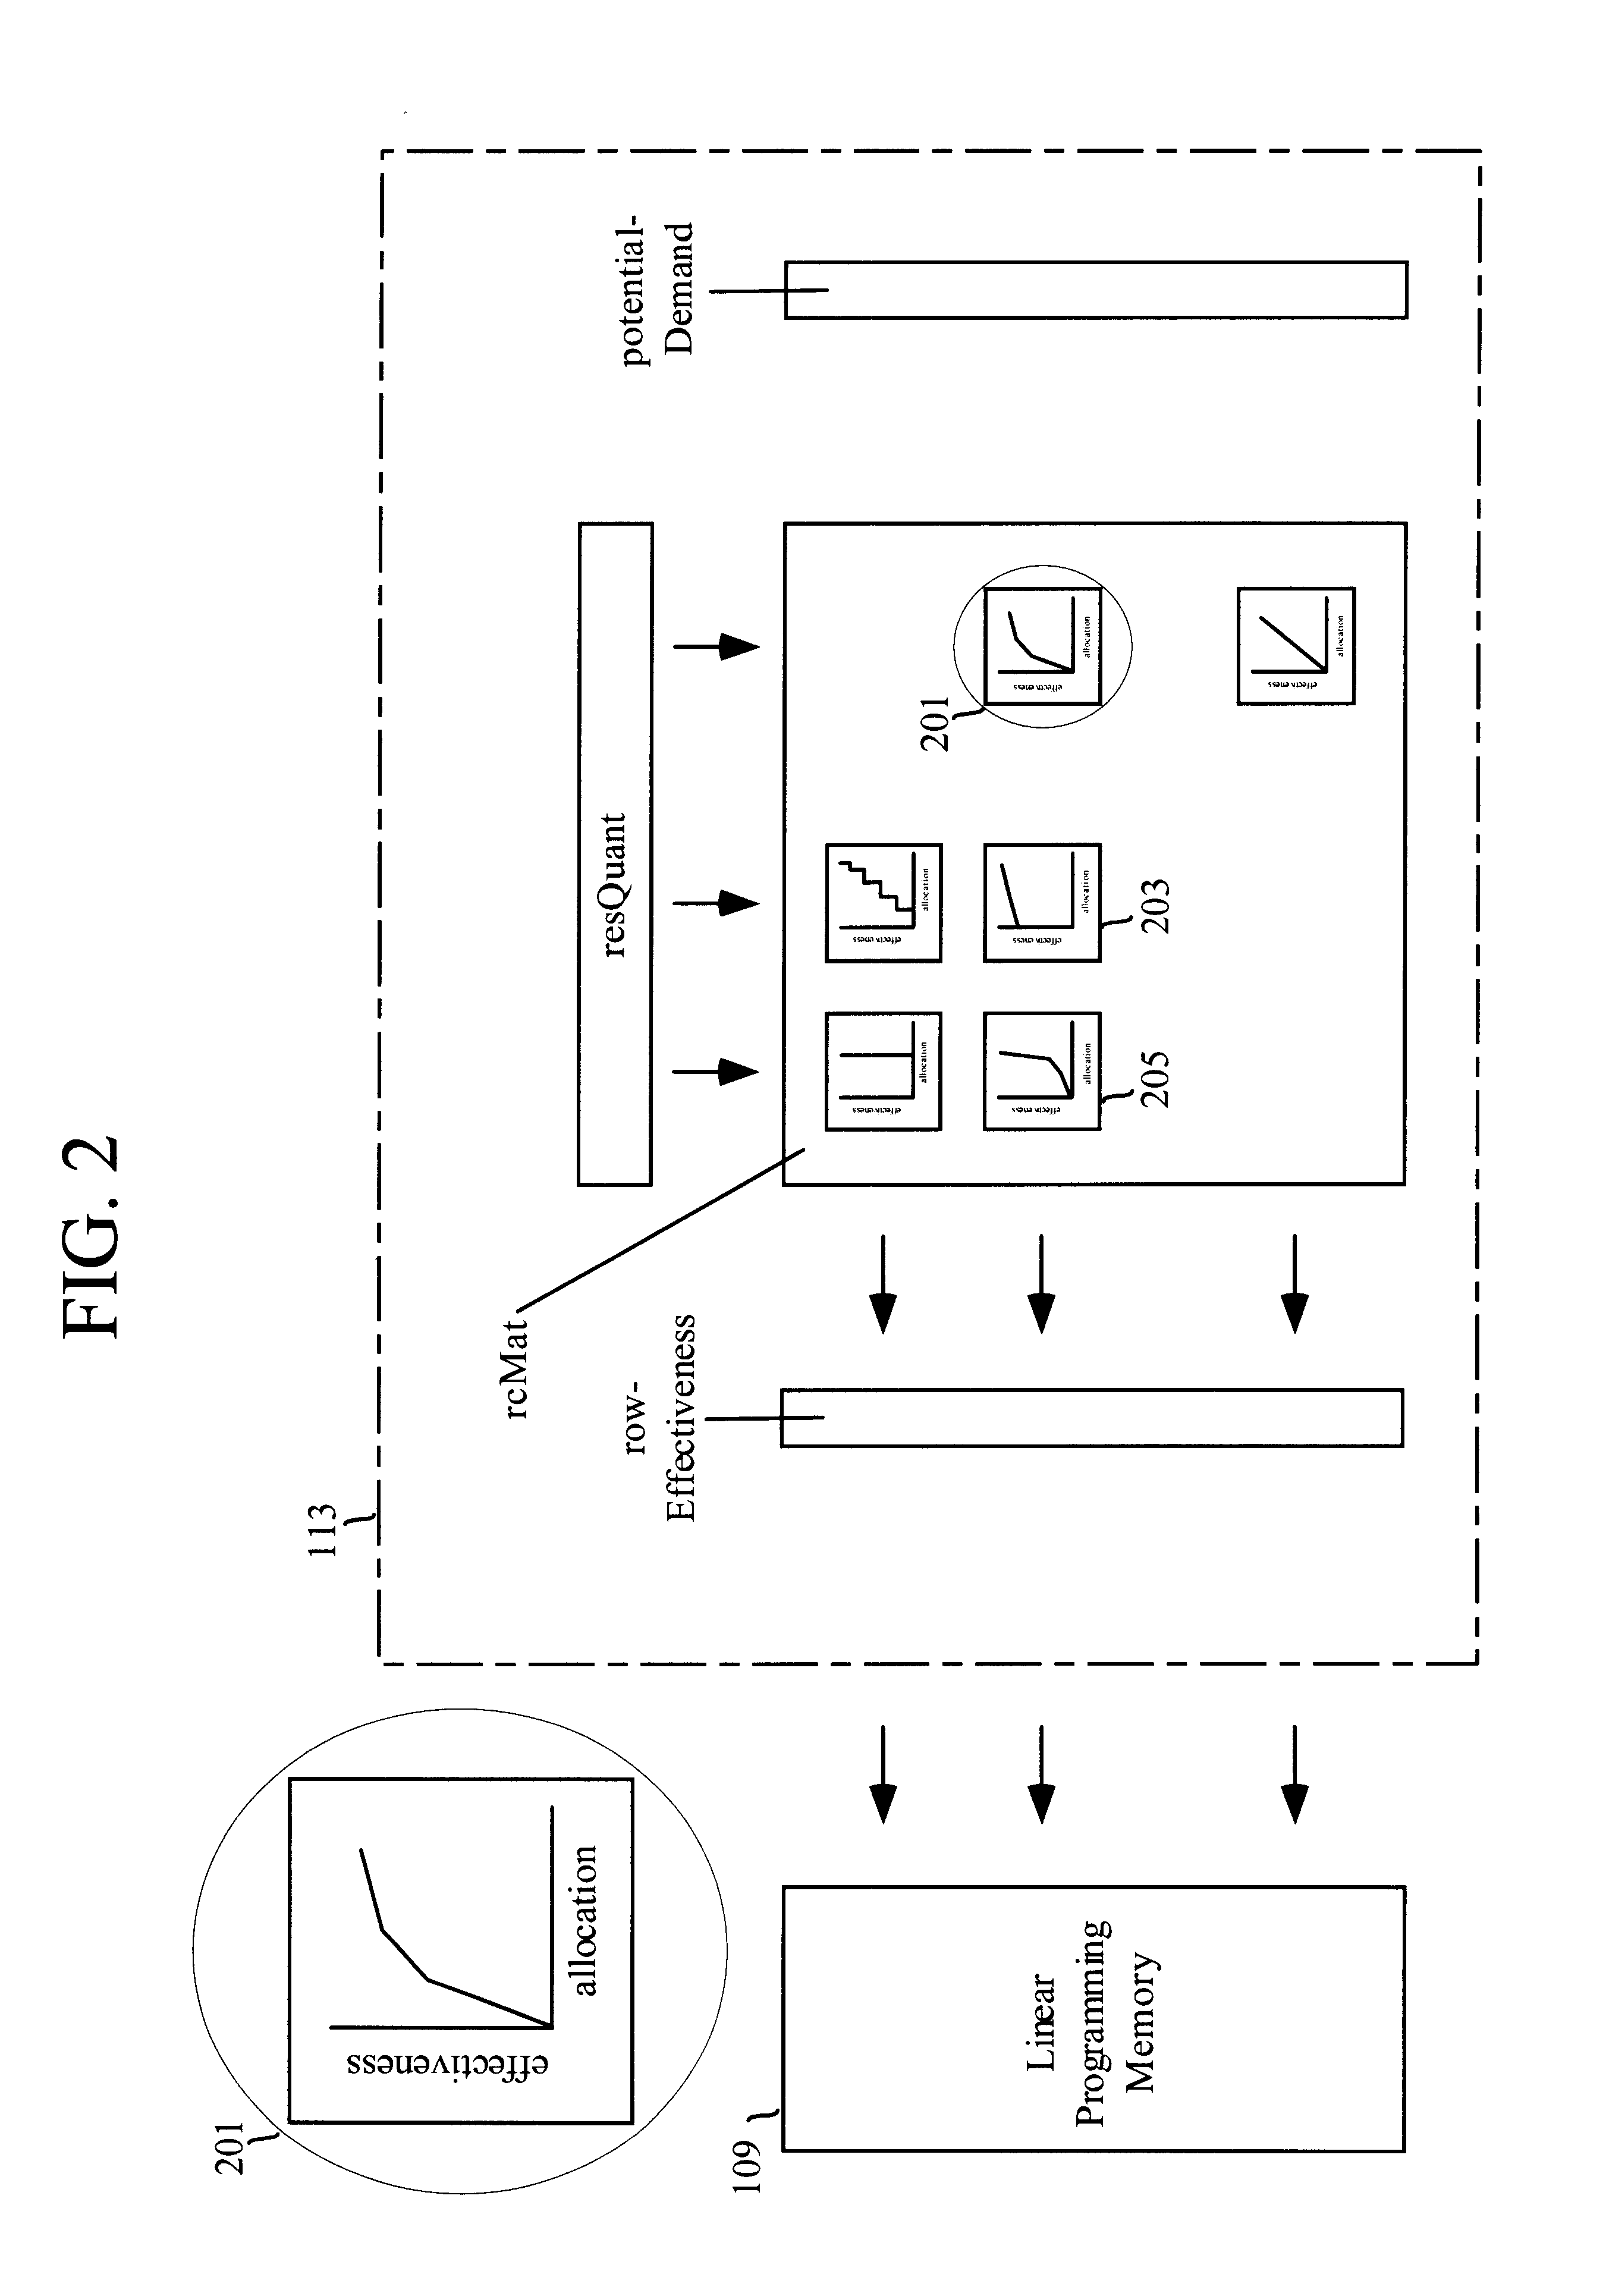 Methods and apparatus for allocating, costing, and pricing organizational resources